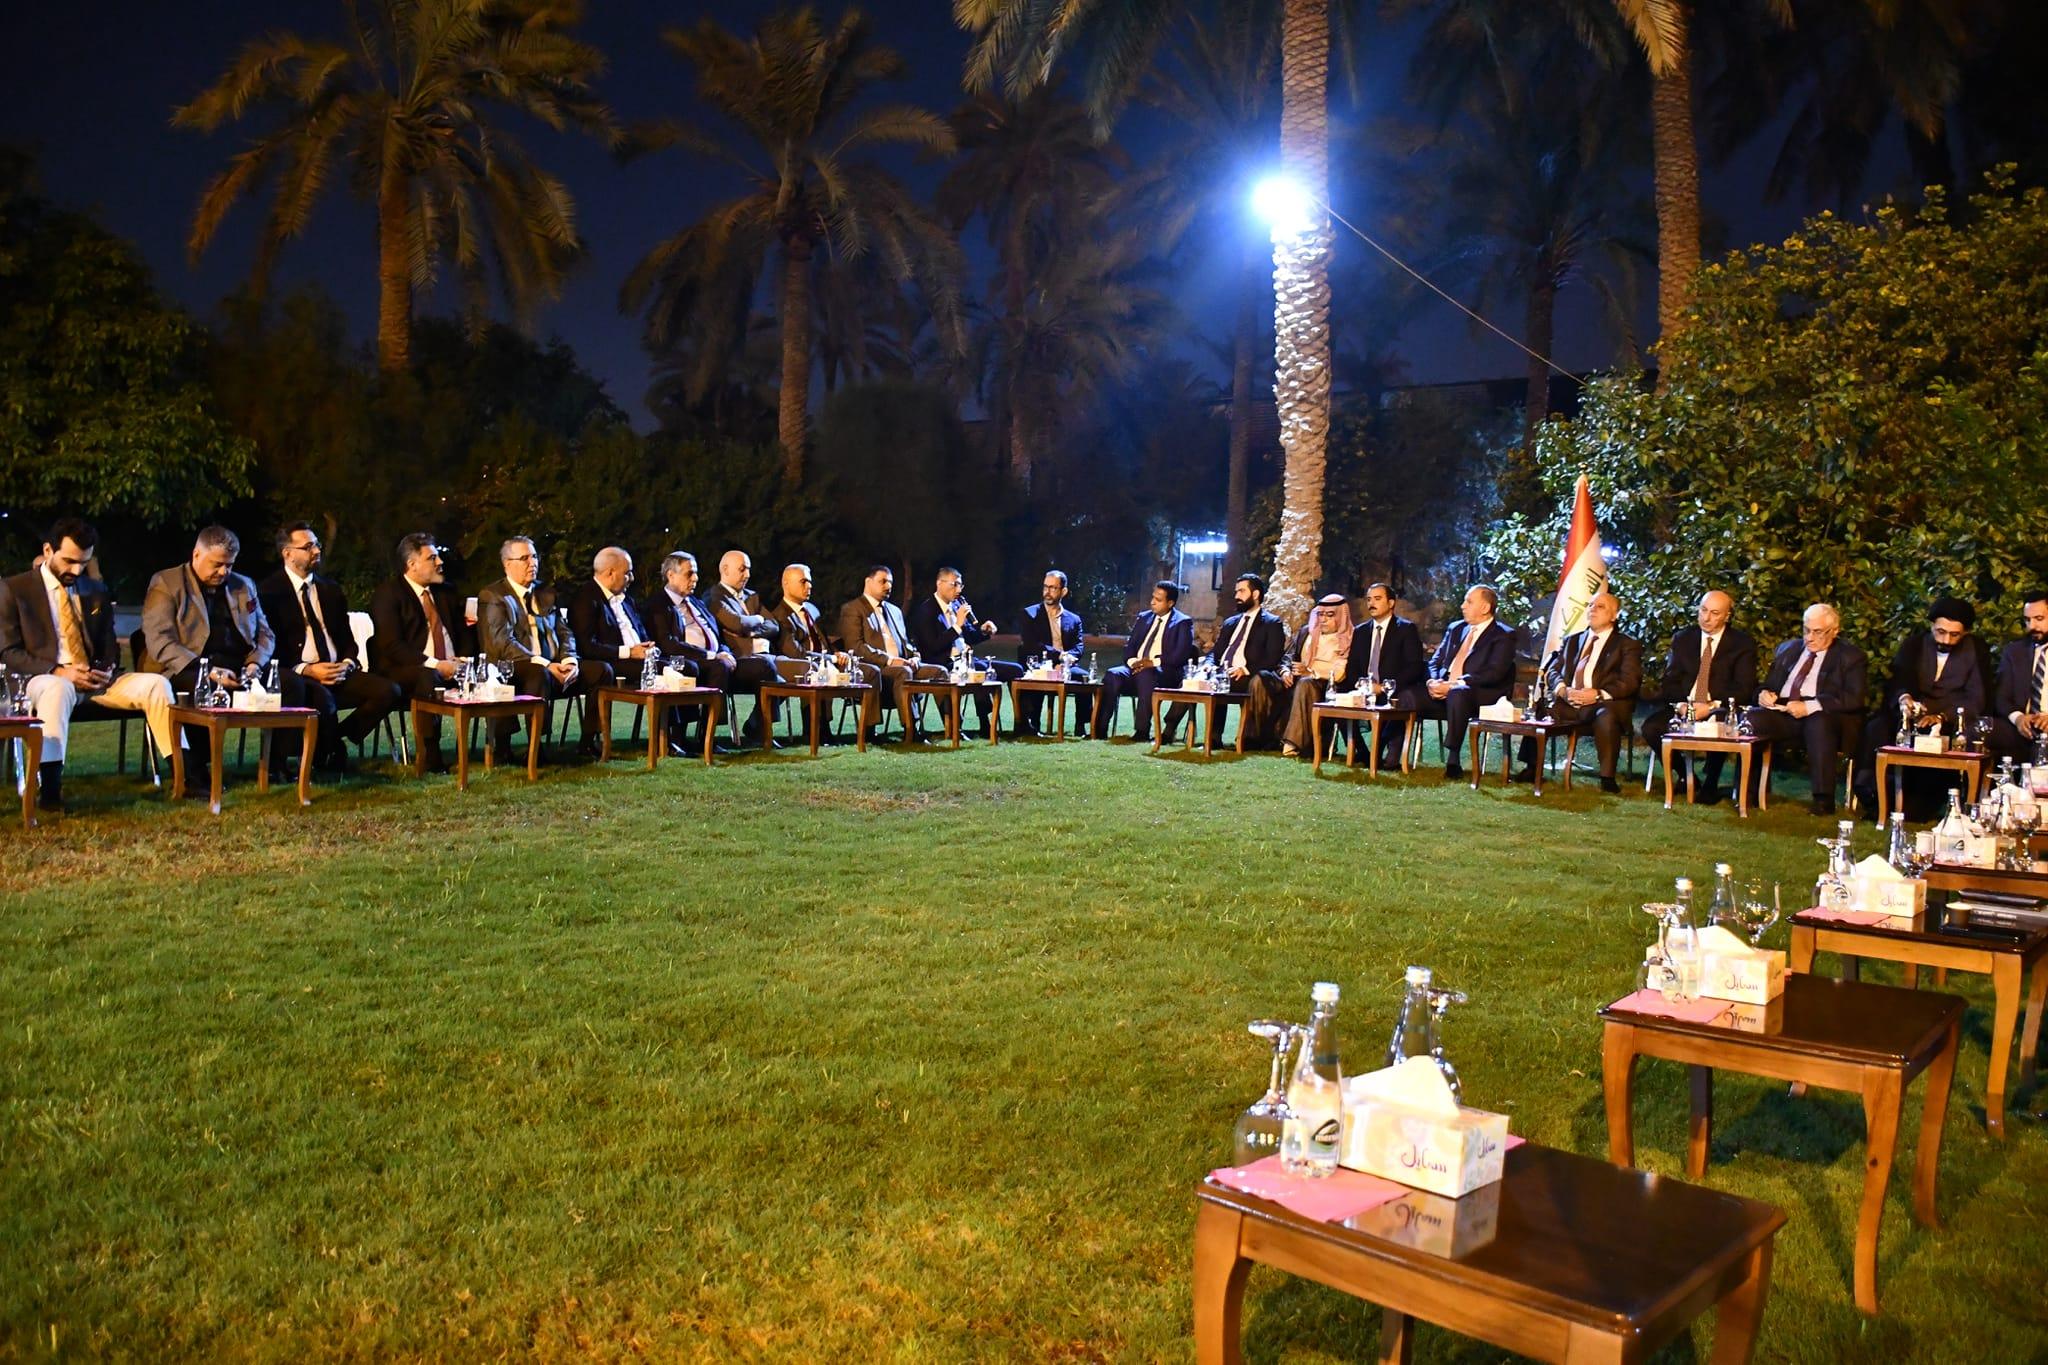 Dr. Al-Abadi hosts several officials and representatives of political entities and discusses with them the Palestinian issue and local elections